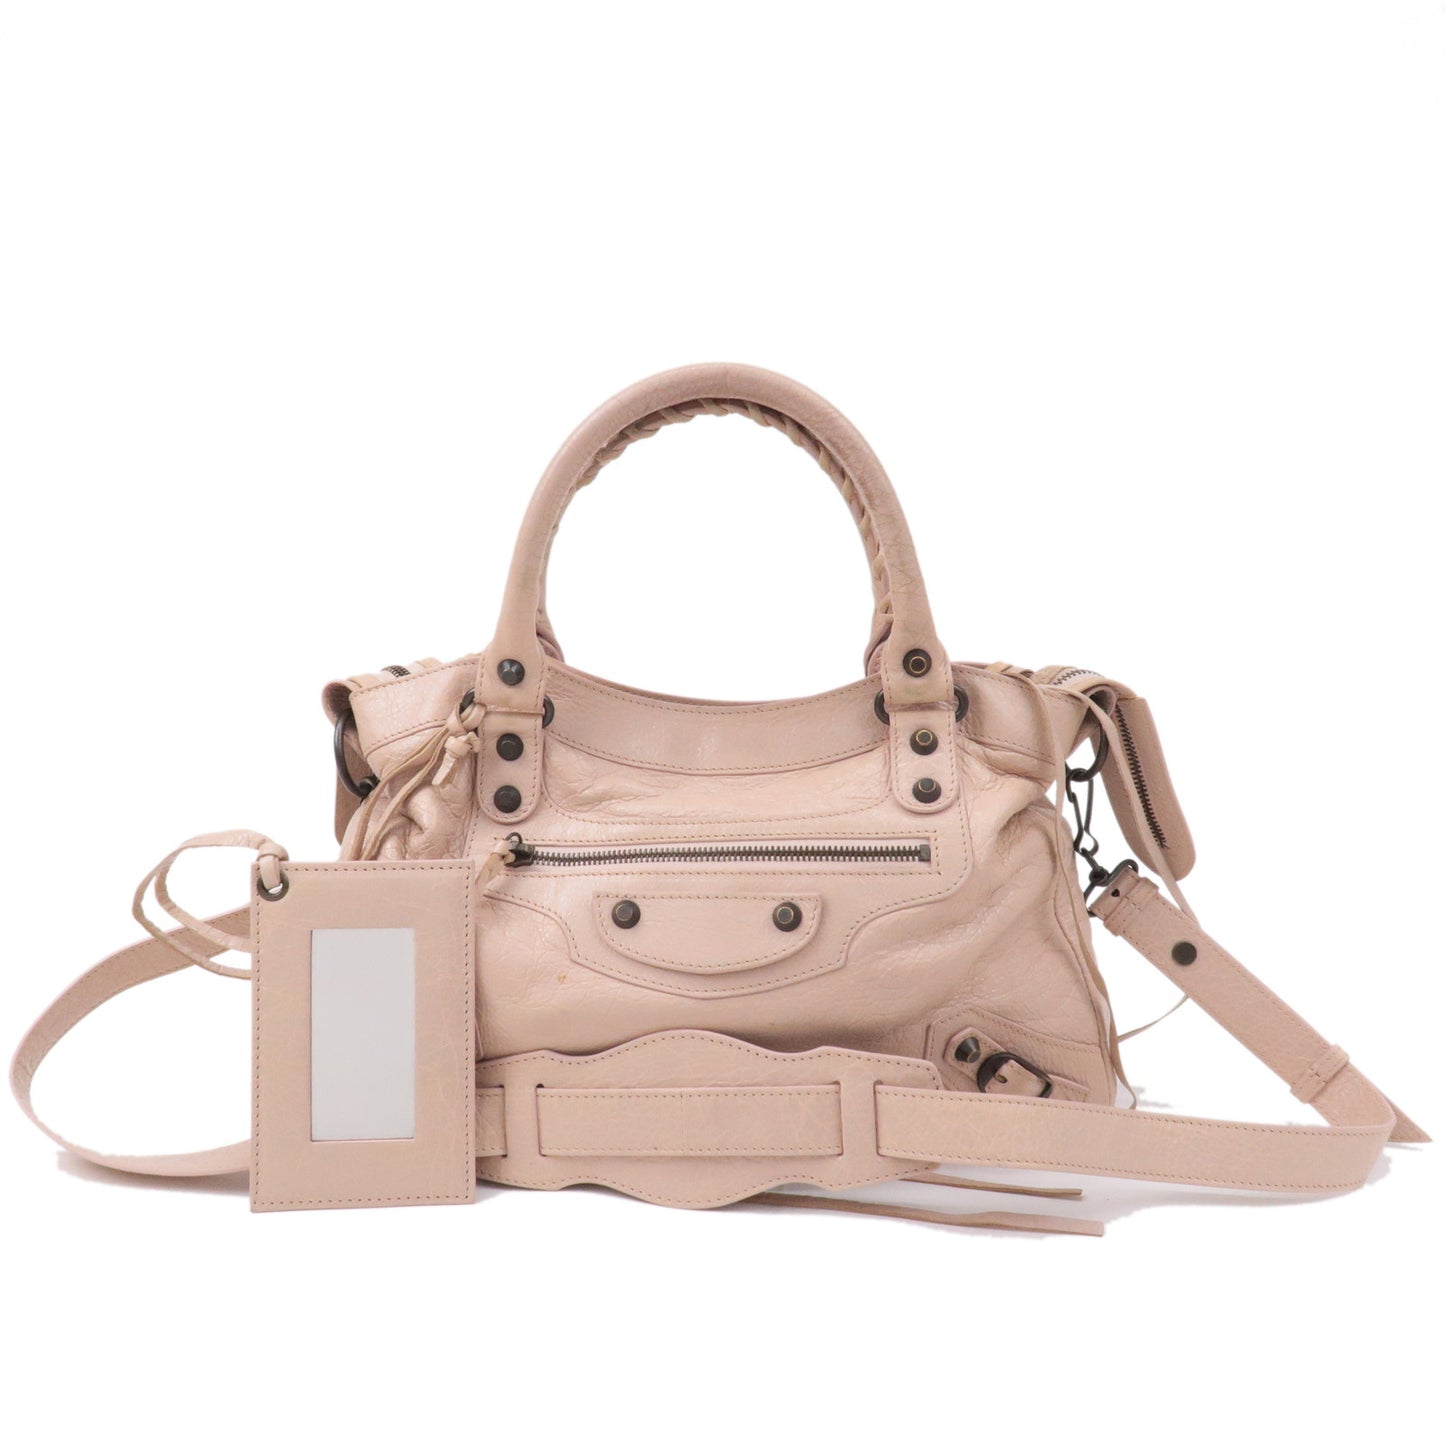 BALENCIAGA The Town Leather 2way Bag Hand Bag Pink Beige 240579